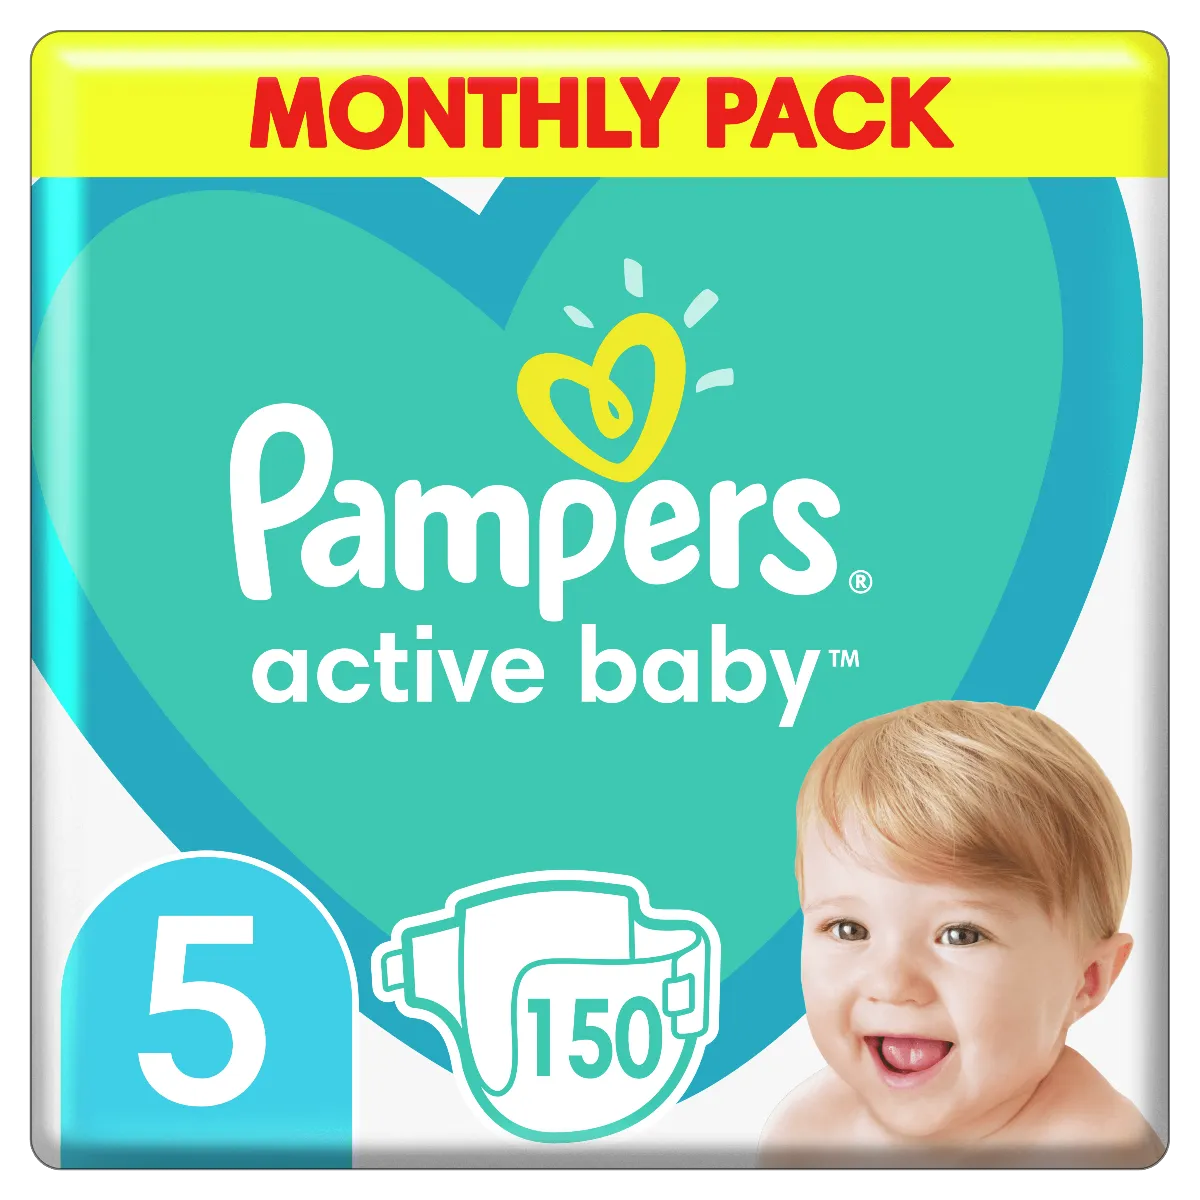 pampers active baby dry 5 promocja